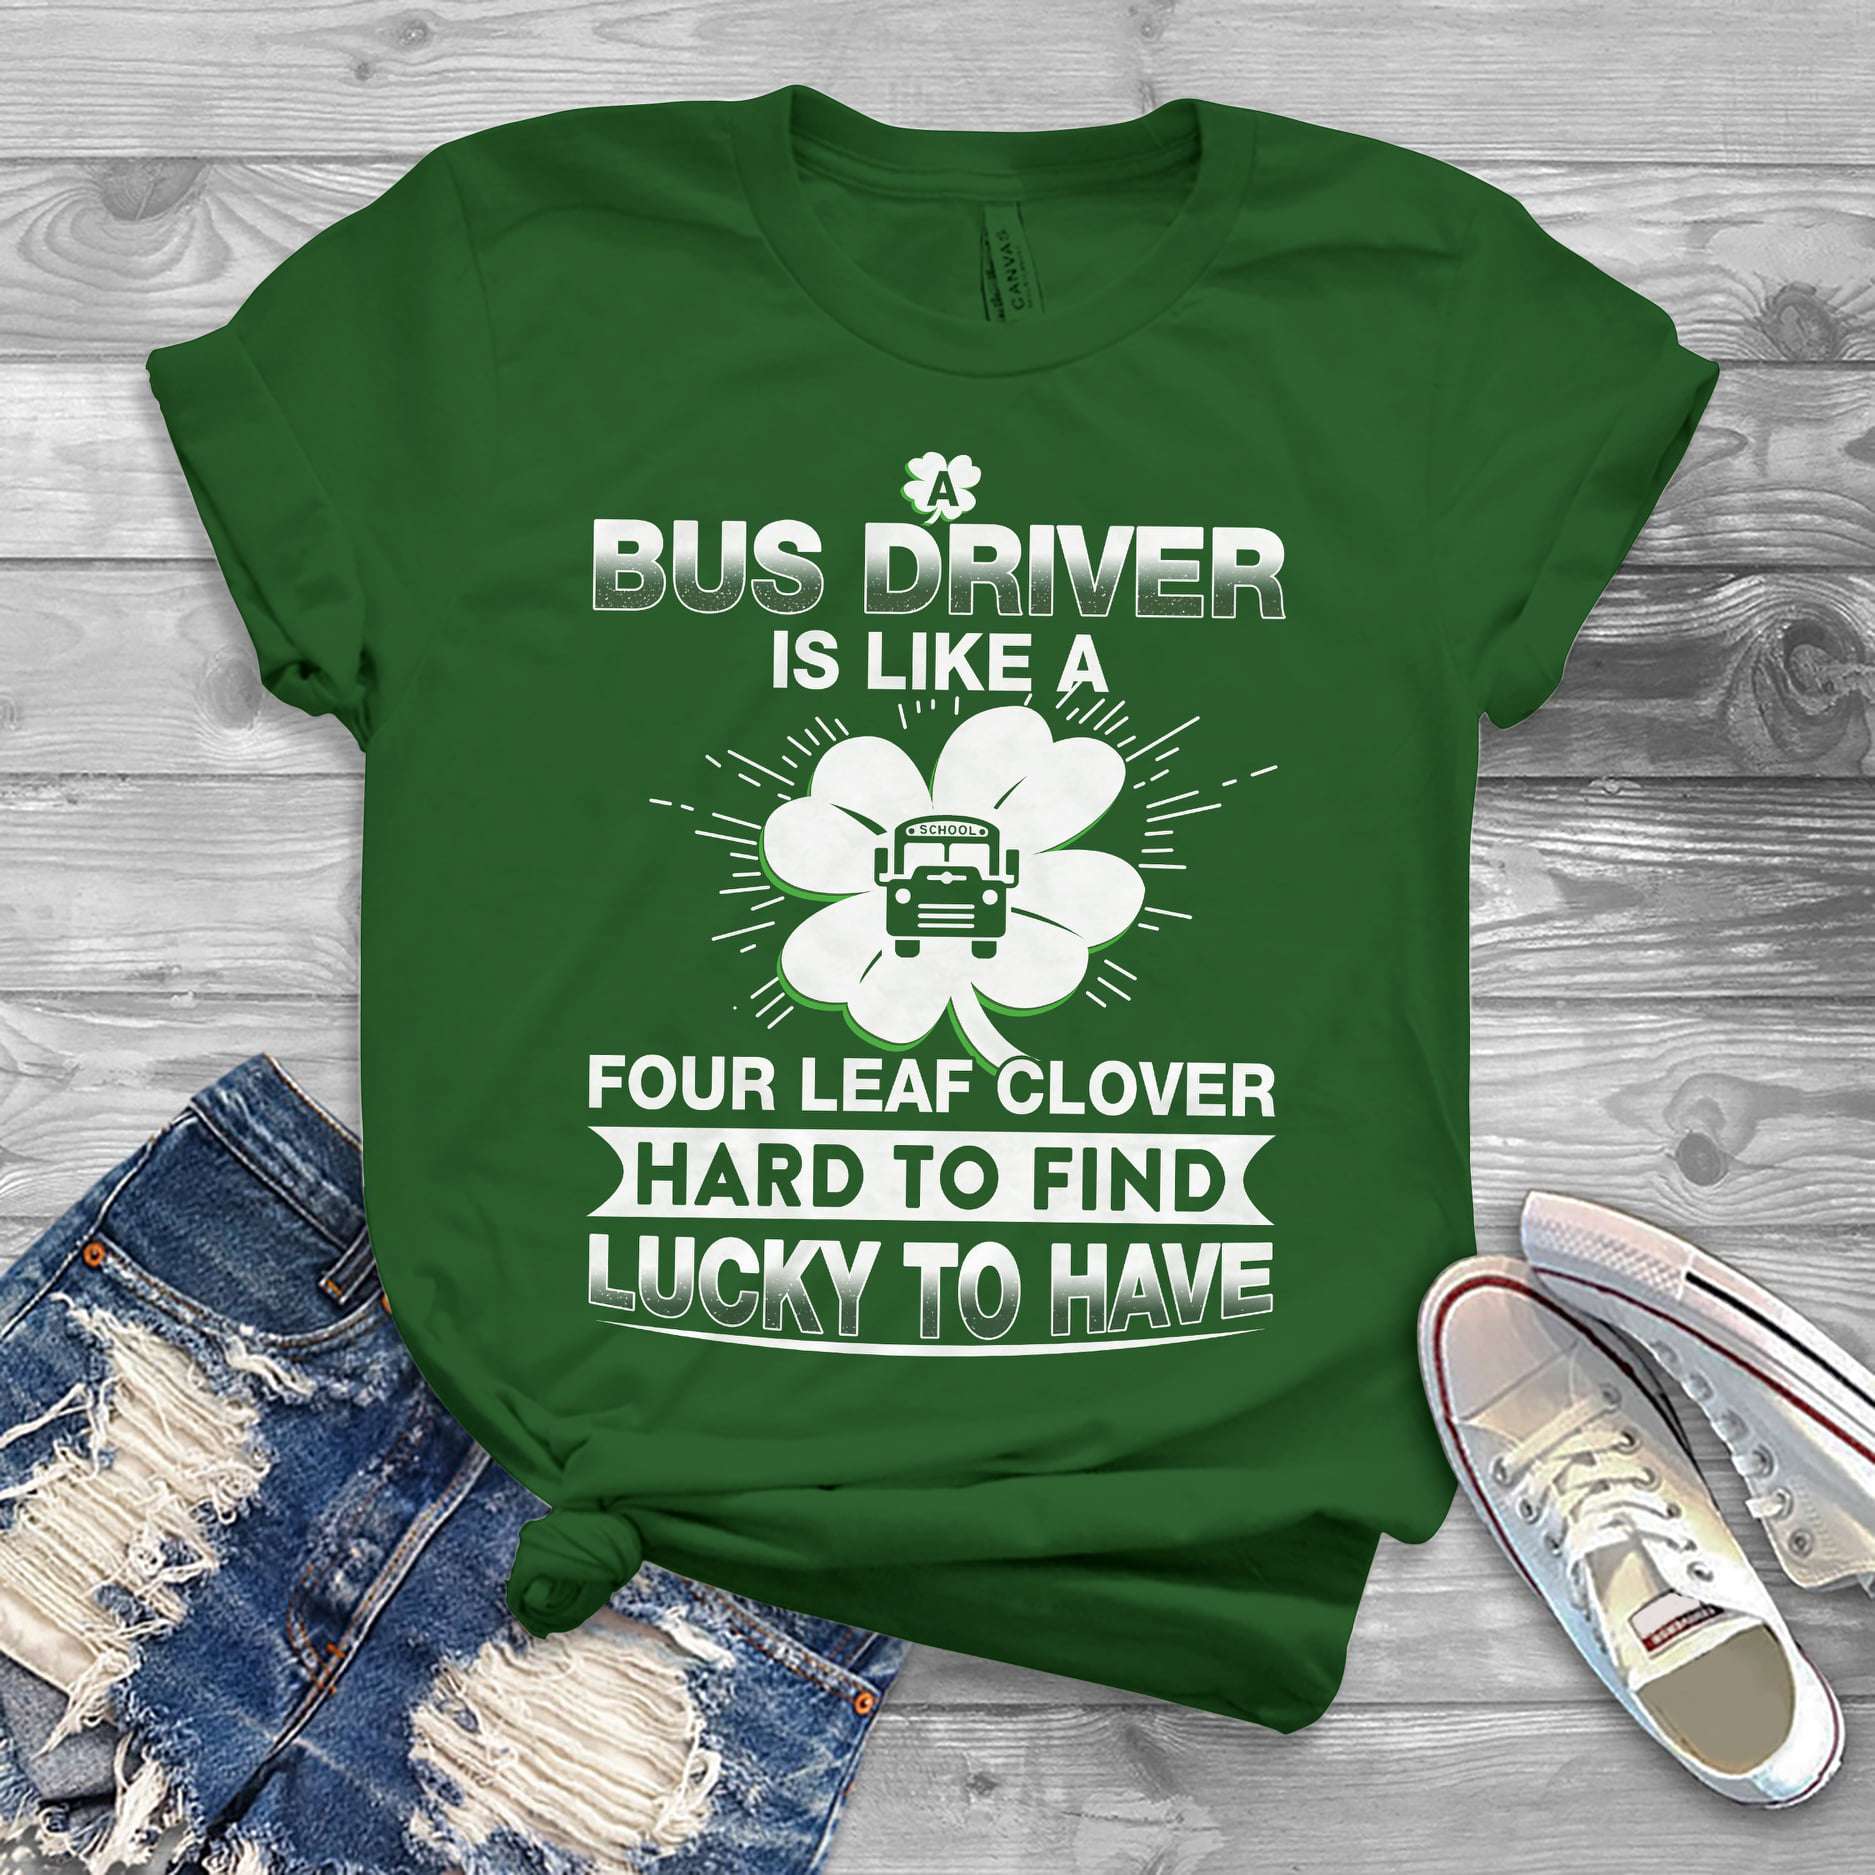 Bus driver is like a Four leaf clover, hard to find, lucky to have - St Patrick day gift